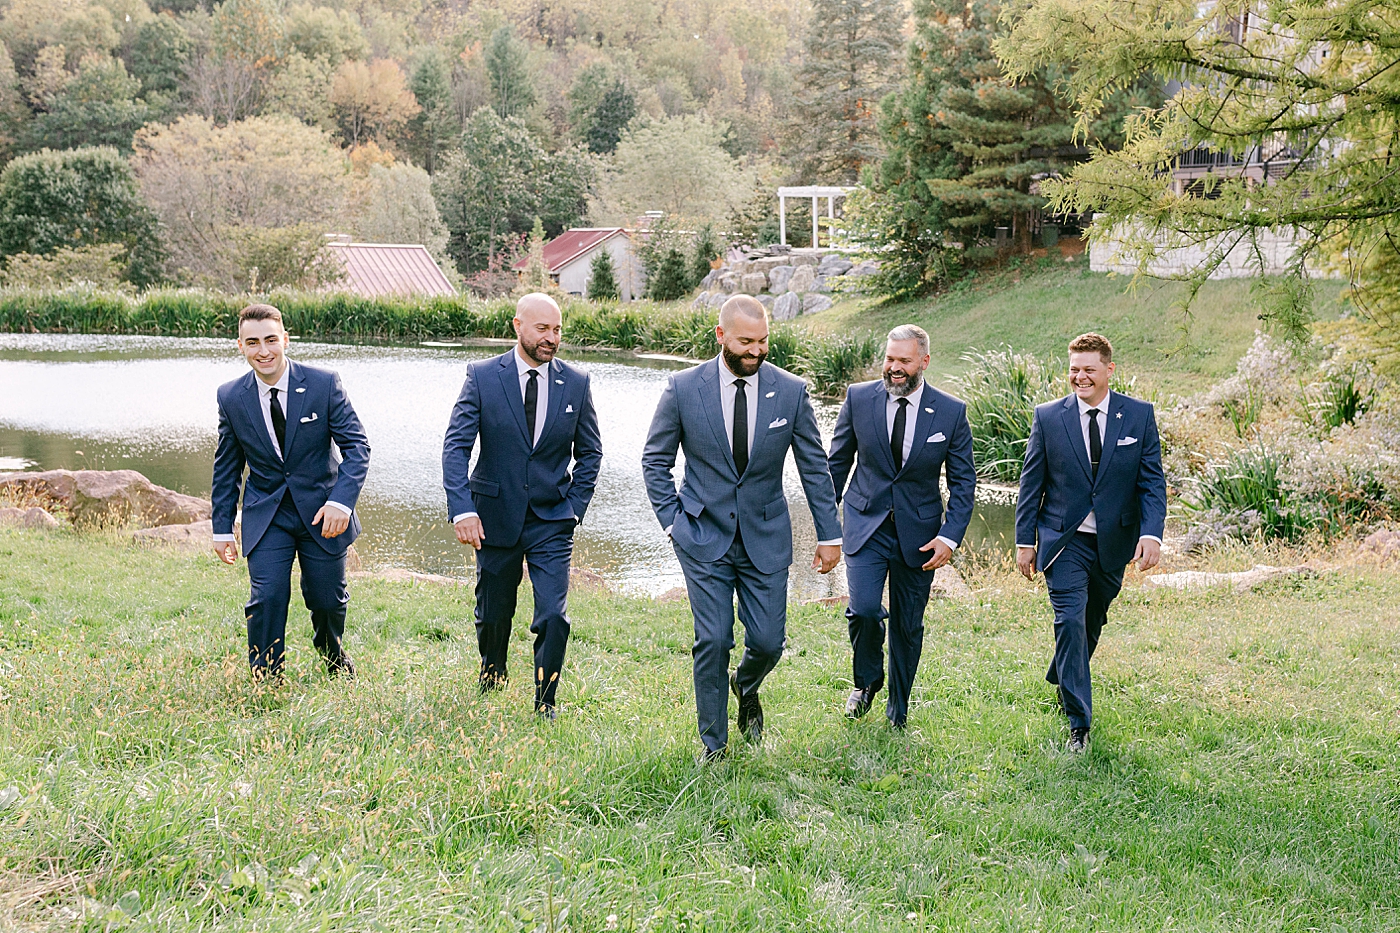 Groomsmen walking together | Photo by Hope Helmuth Photography